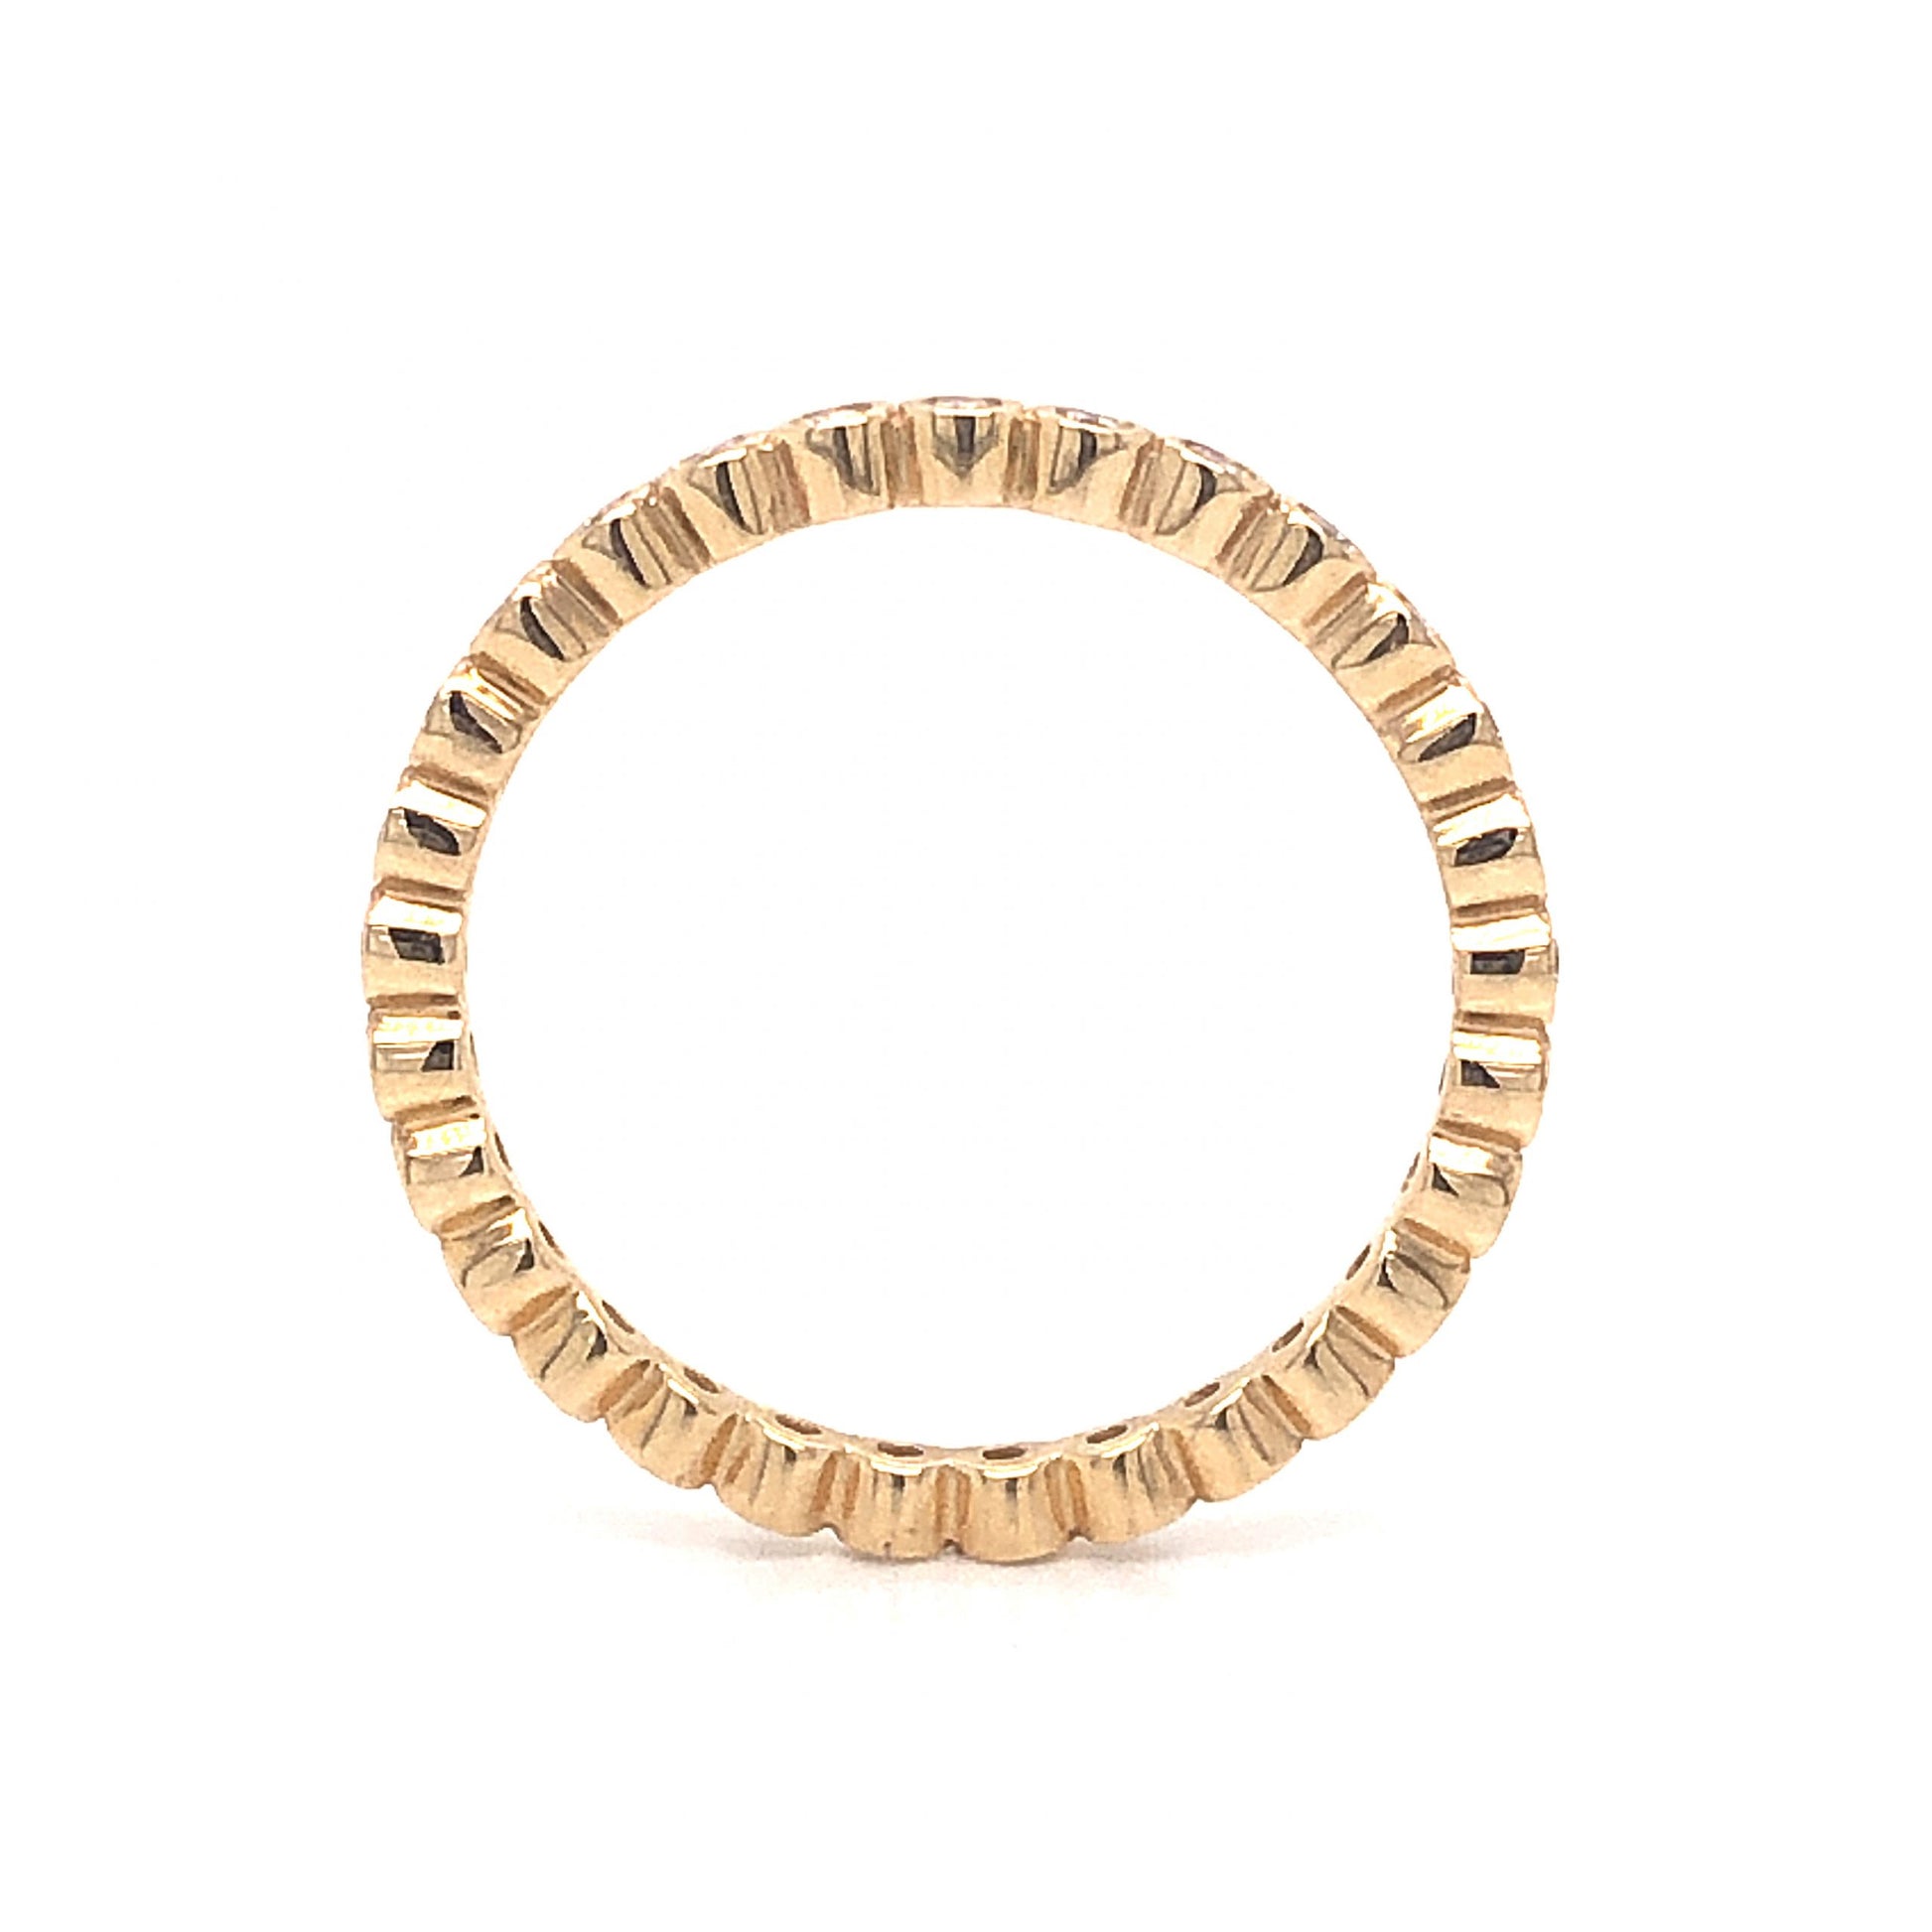 Bezel Set Eternity Diamond Band in 14k Yellow GoldComposition: 14 Karat Yellow Gold Ring Size: 6.5 Total Diamond Weight: .32ct Total Gram Weight: 1.6 g Inscription: 14k .32 ct
      